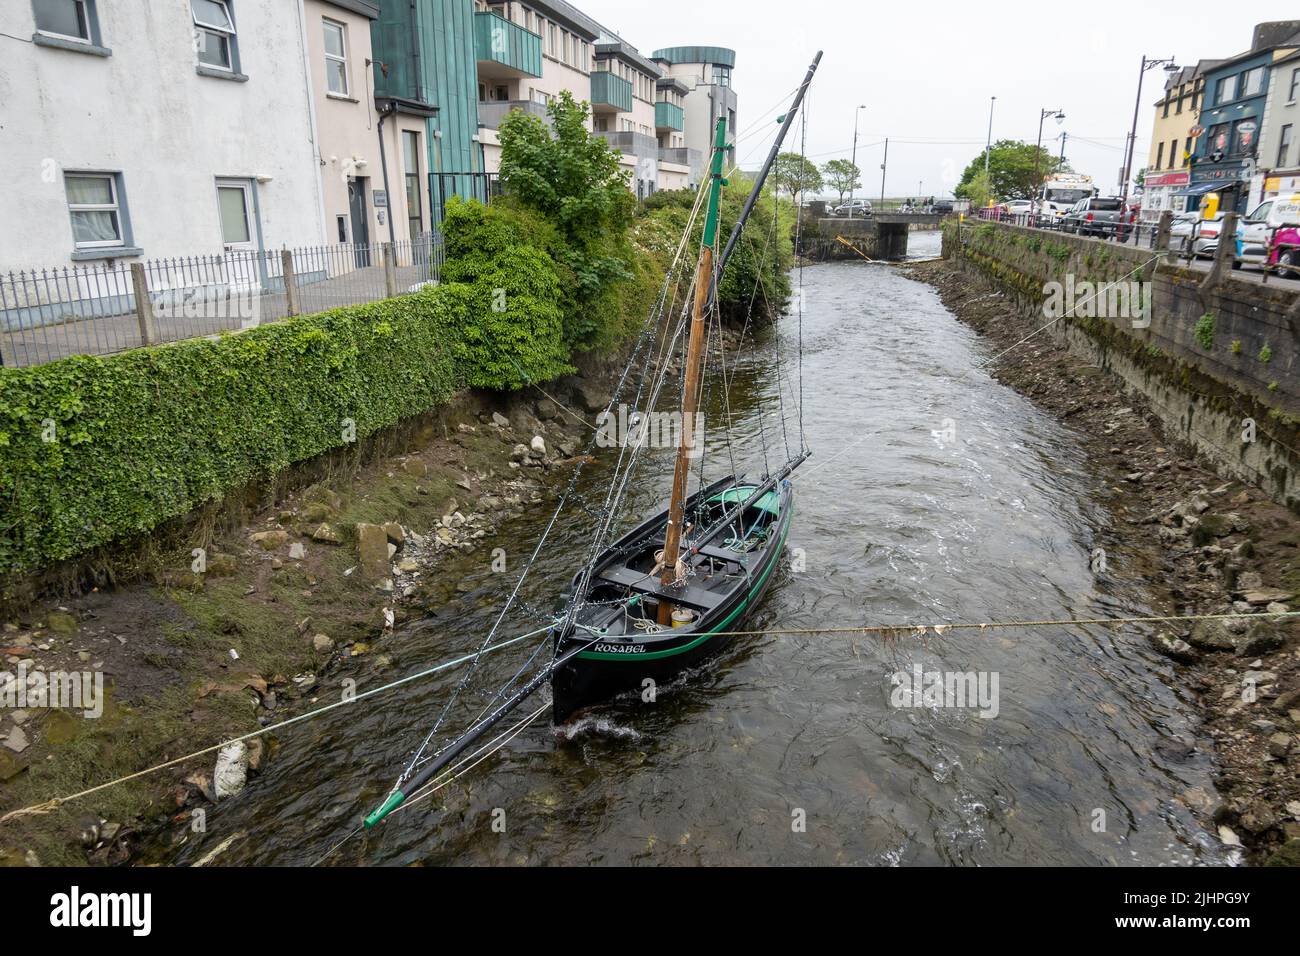 Boat on the Eglinton Canal, Galway, Republic of Ireland Stock Photo